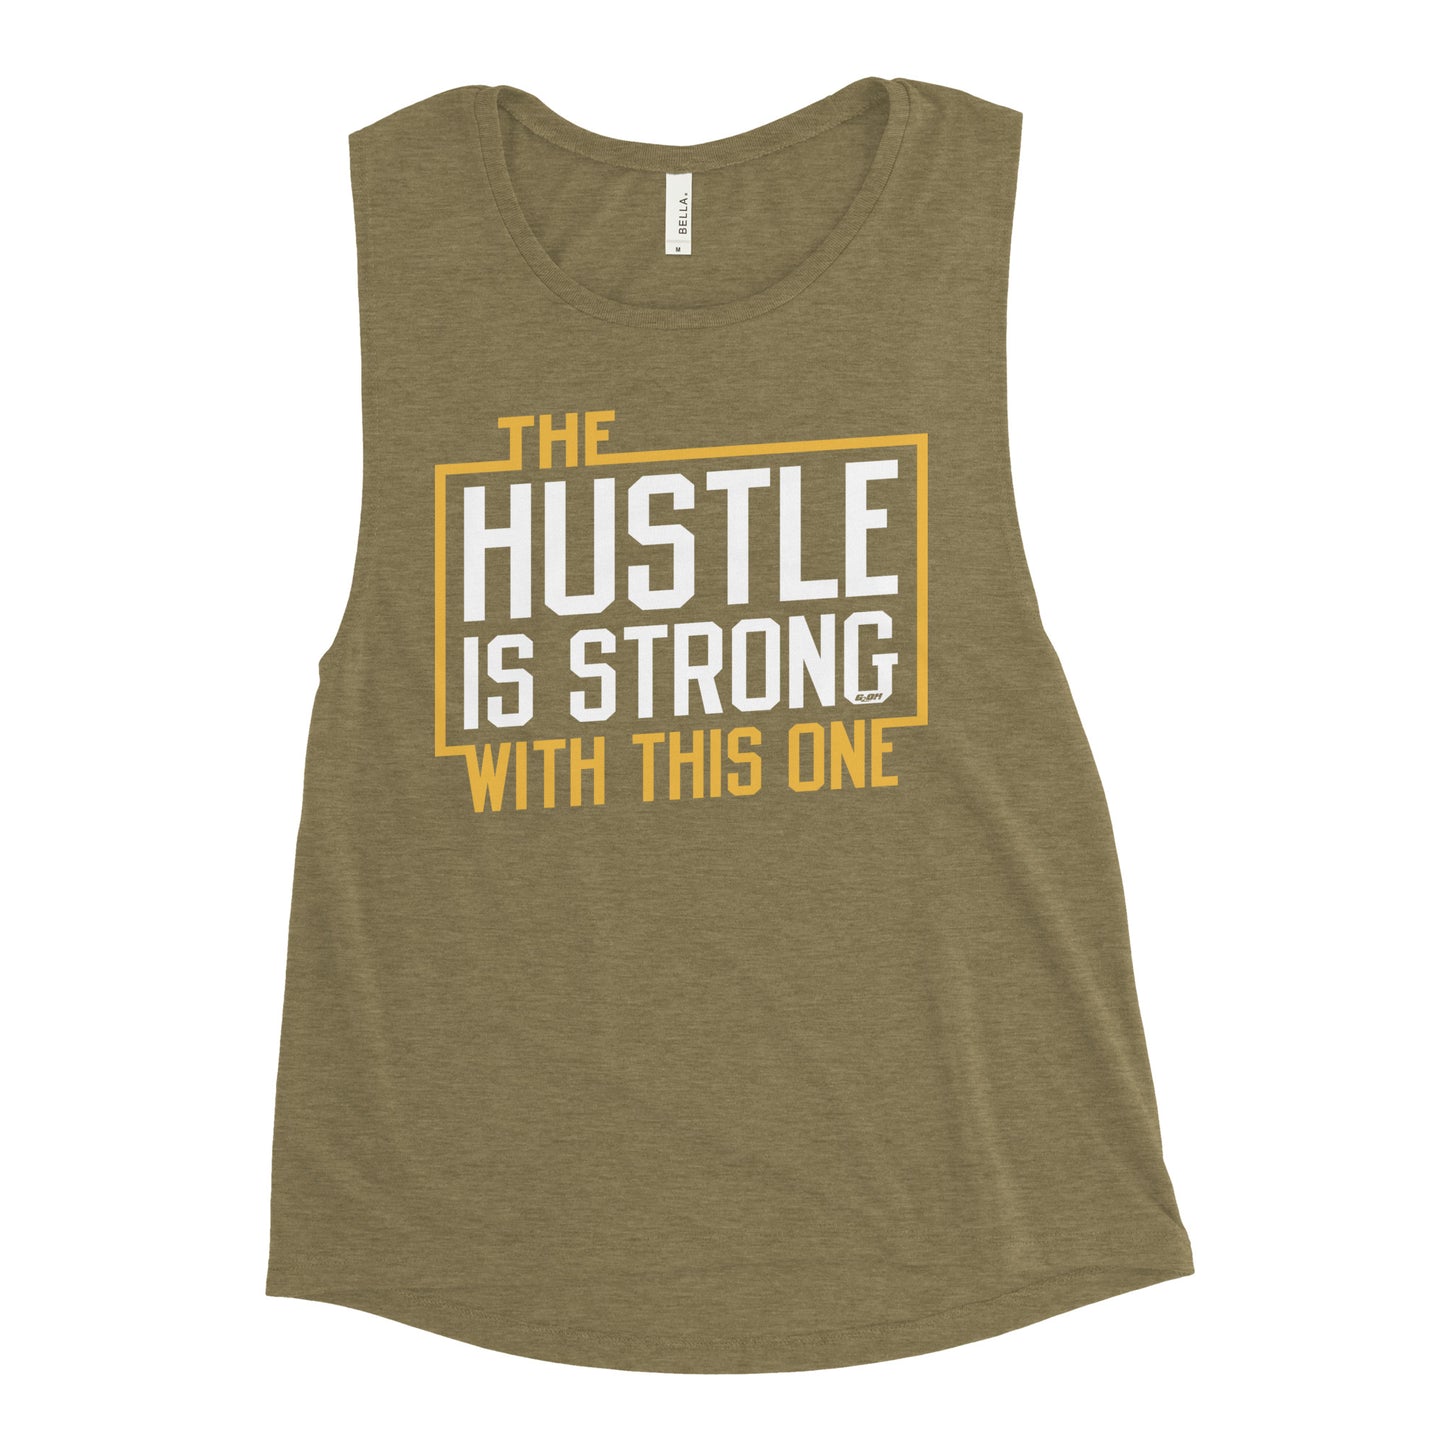 The Hustle Is Strong With This One Women's Muscle Tank